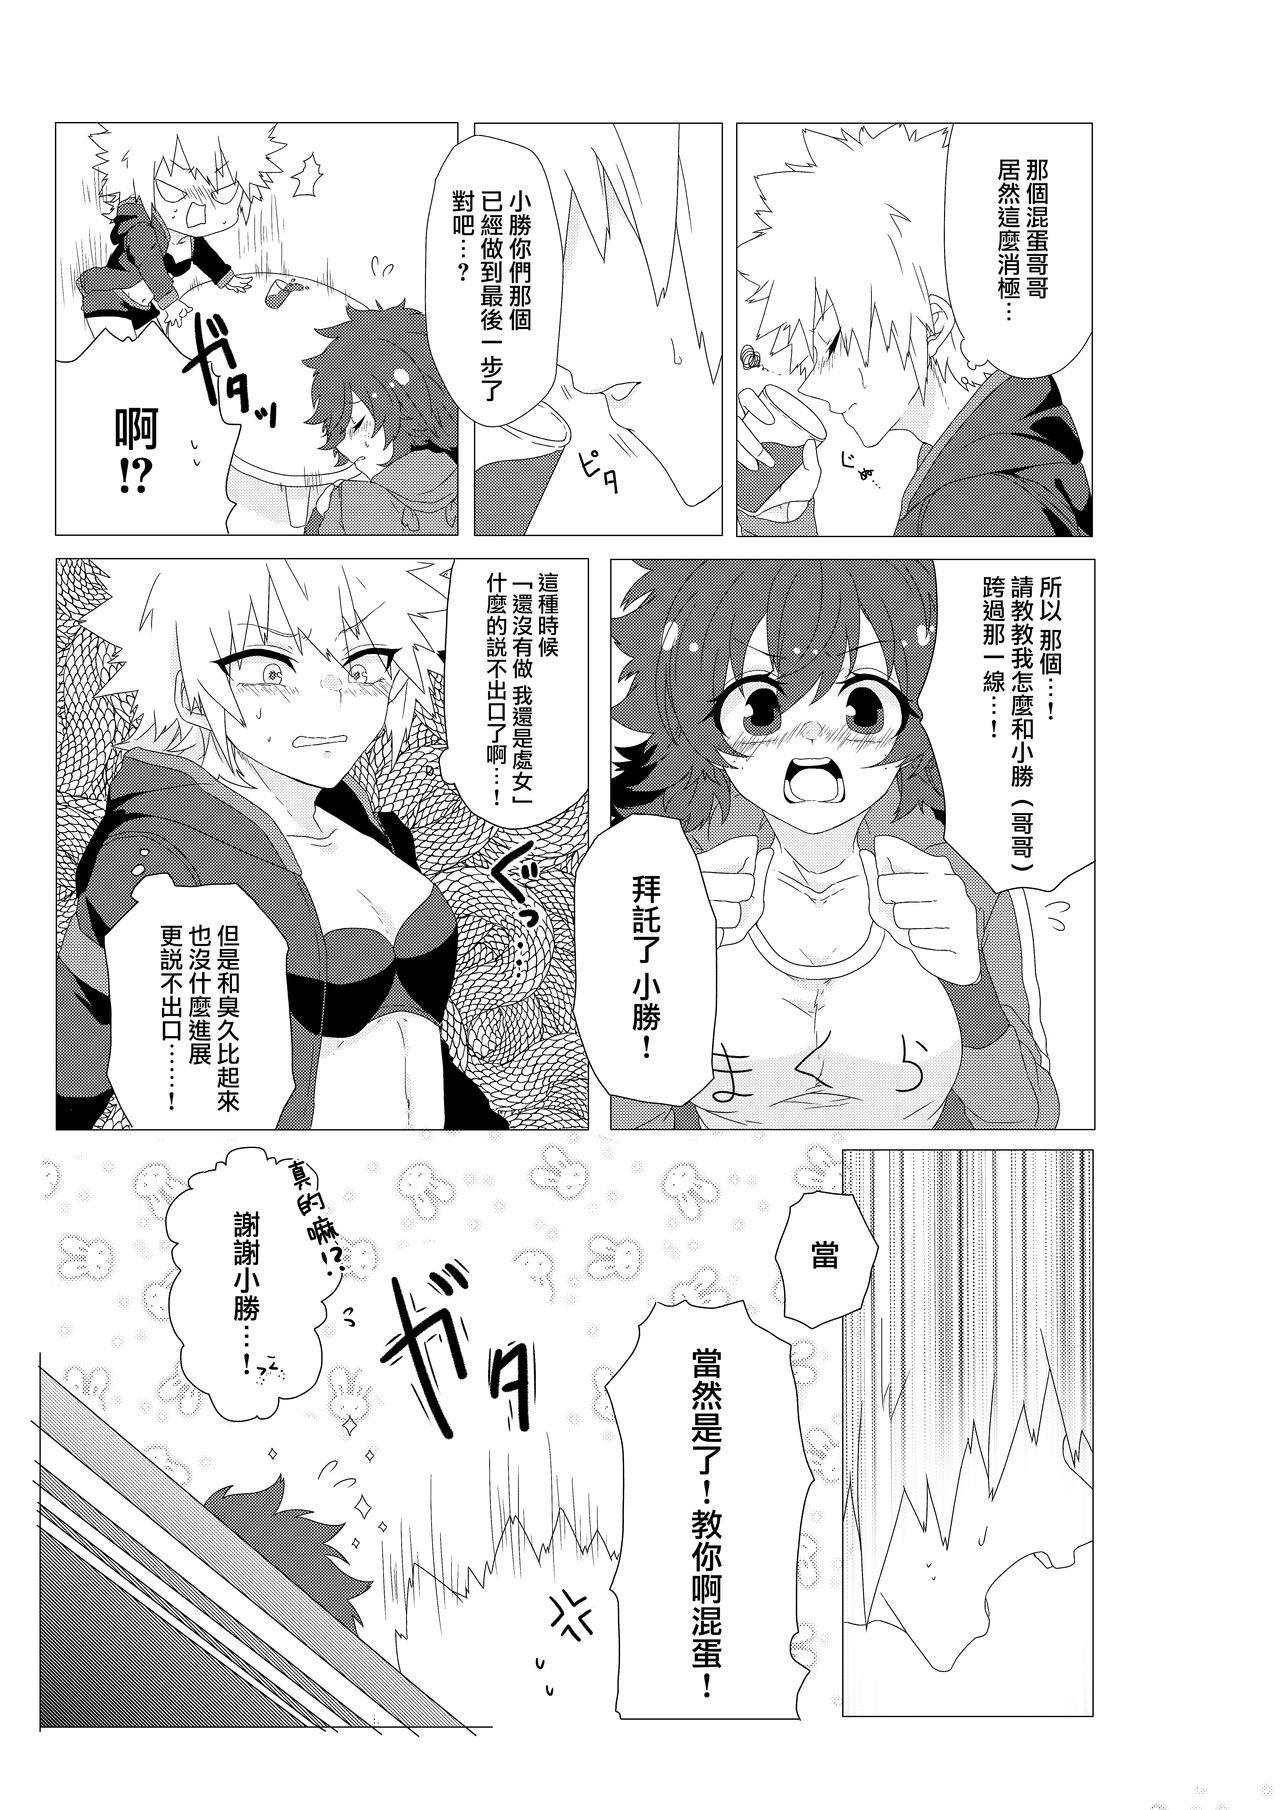 Nudes Chicken na Kareshi to Lingerie - My hero academia Gayhardcore - Page 5